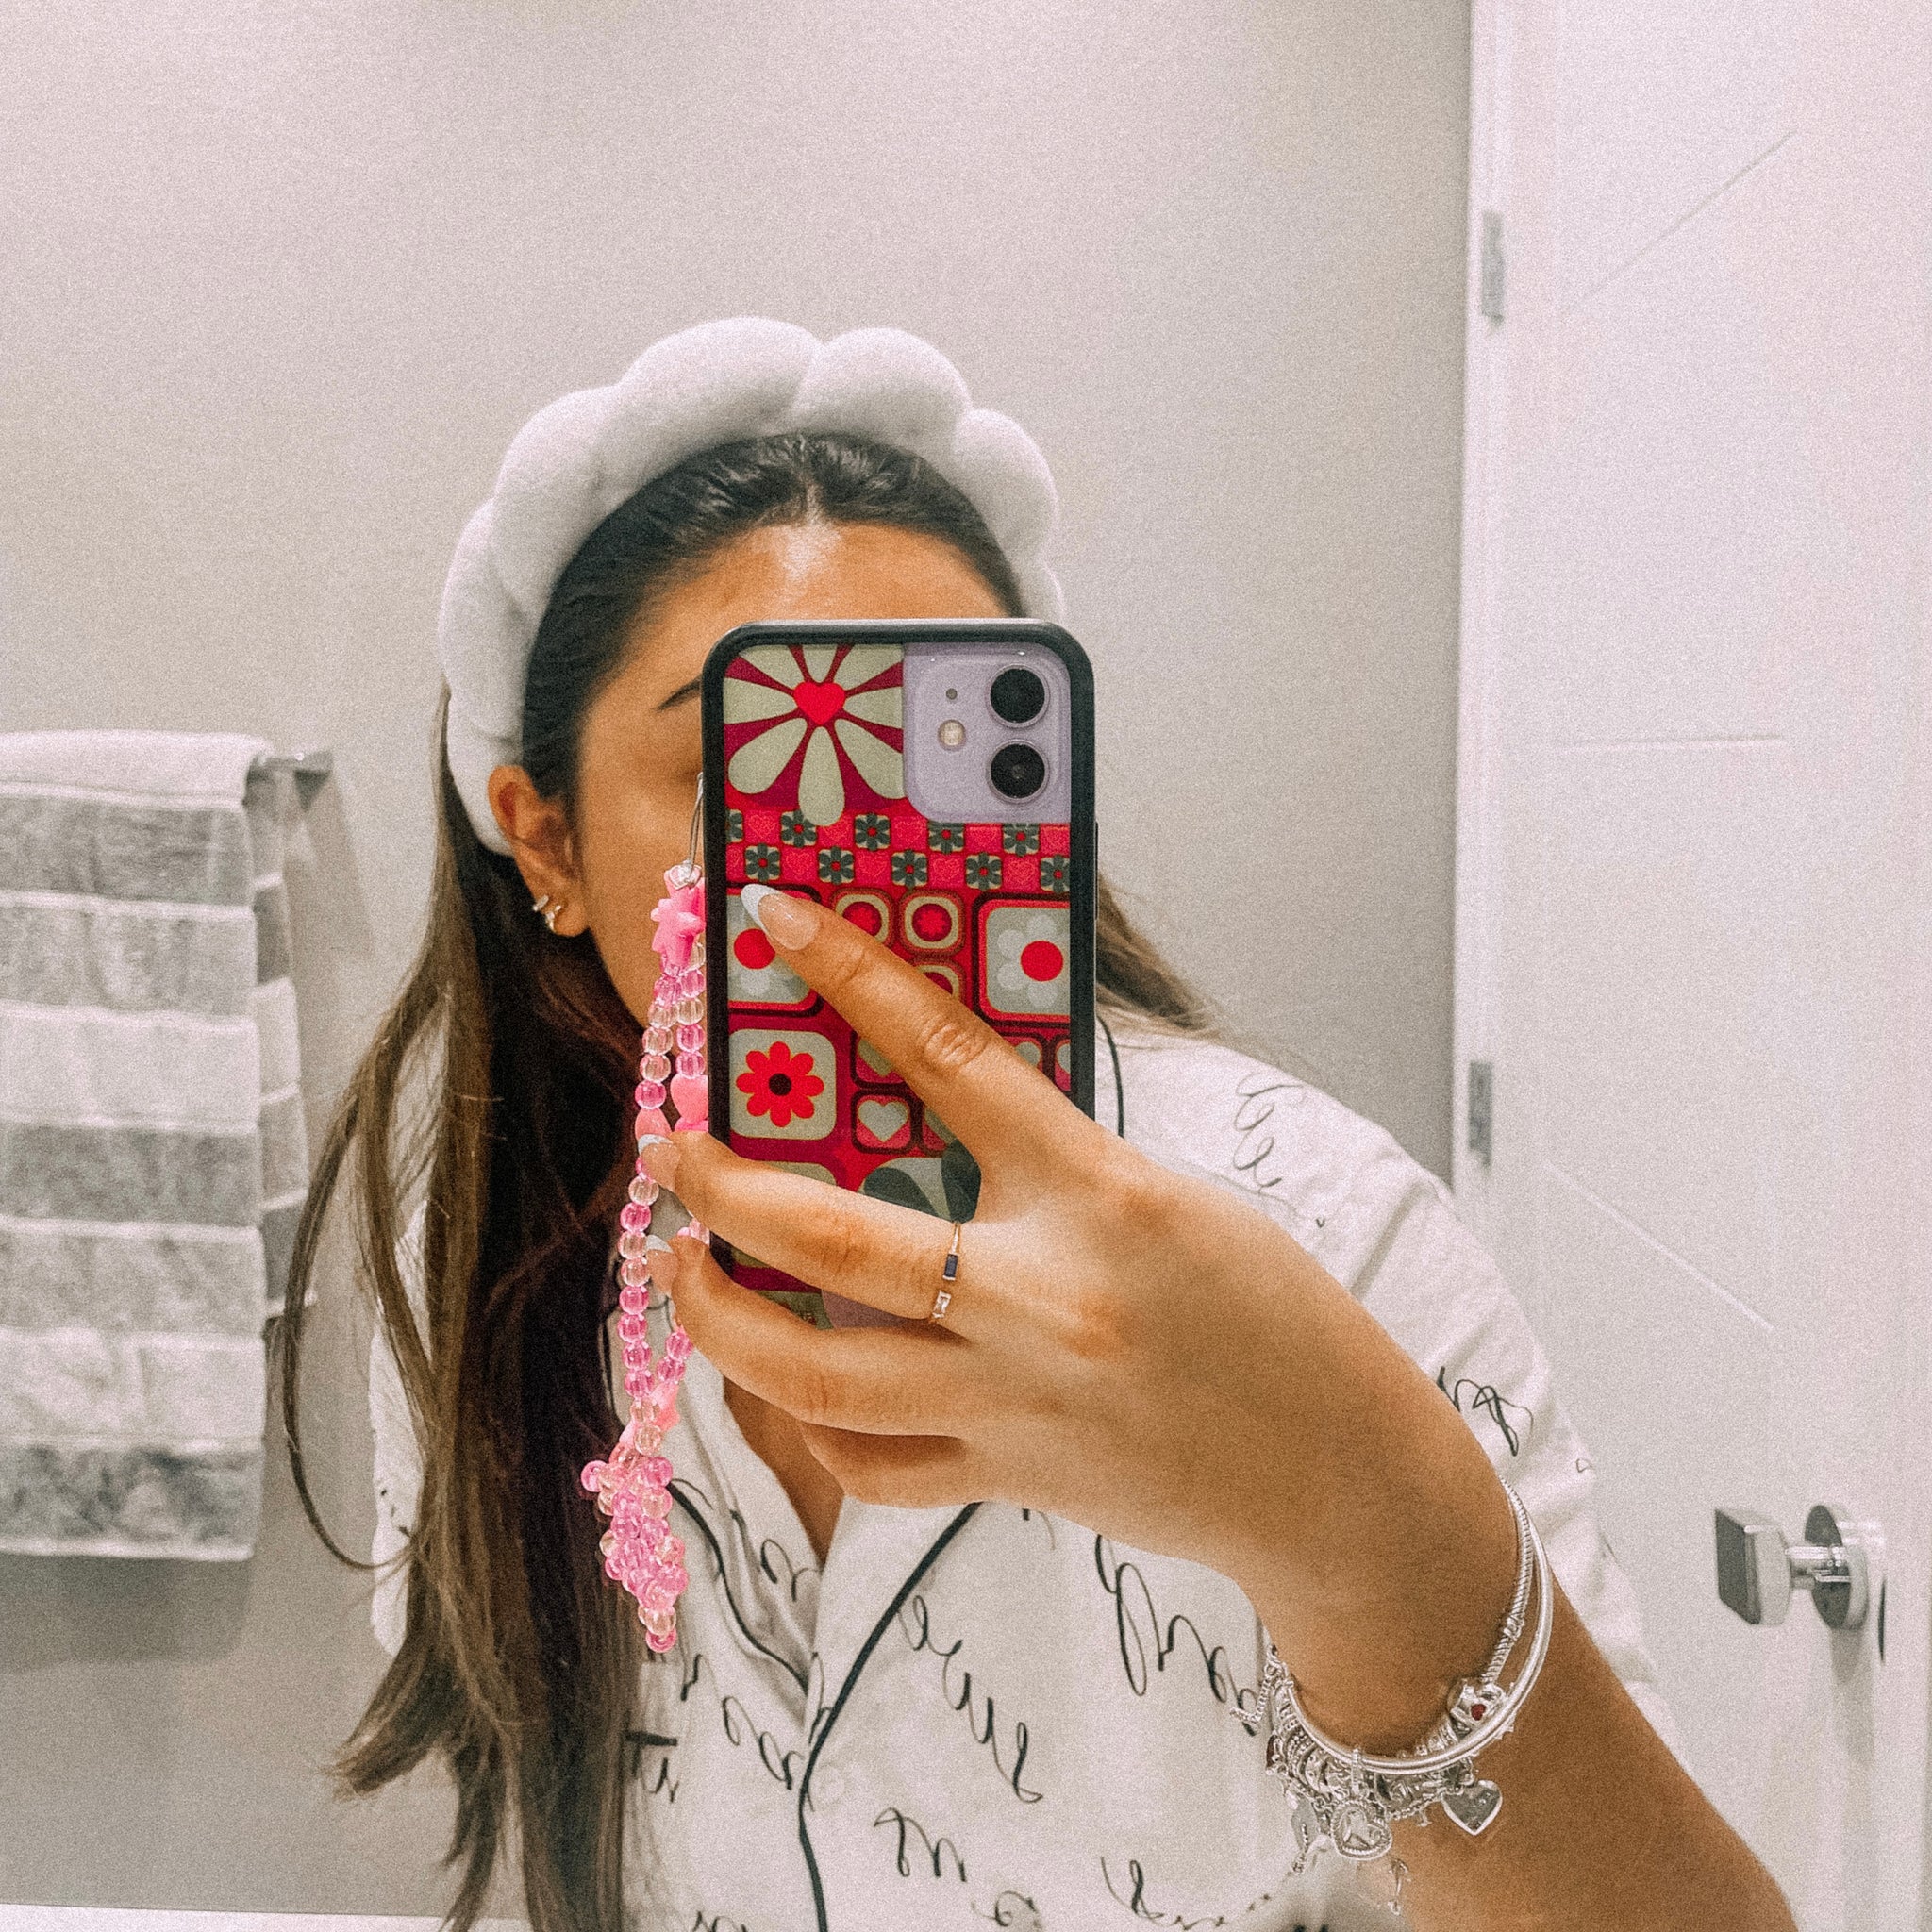 15 Designer Headbands For Women That Will Elevate Any Outfit – topsfordays